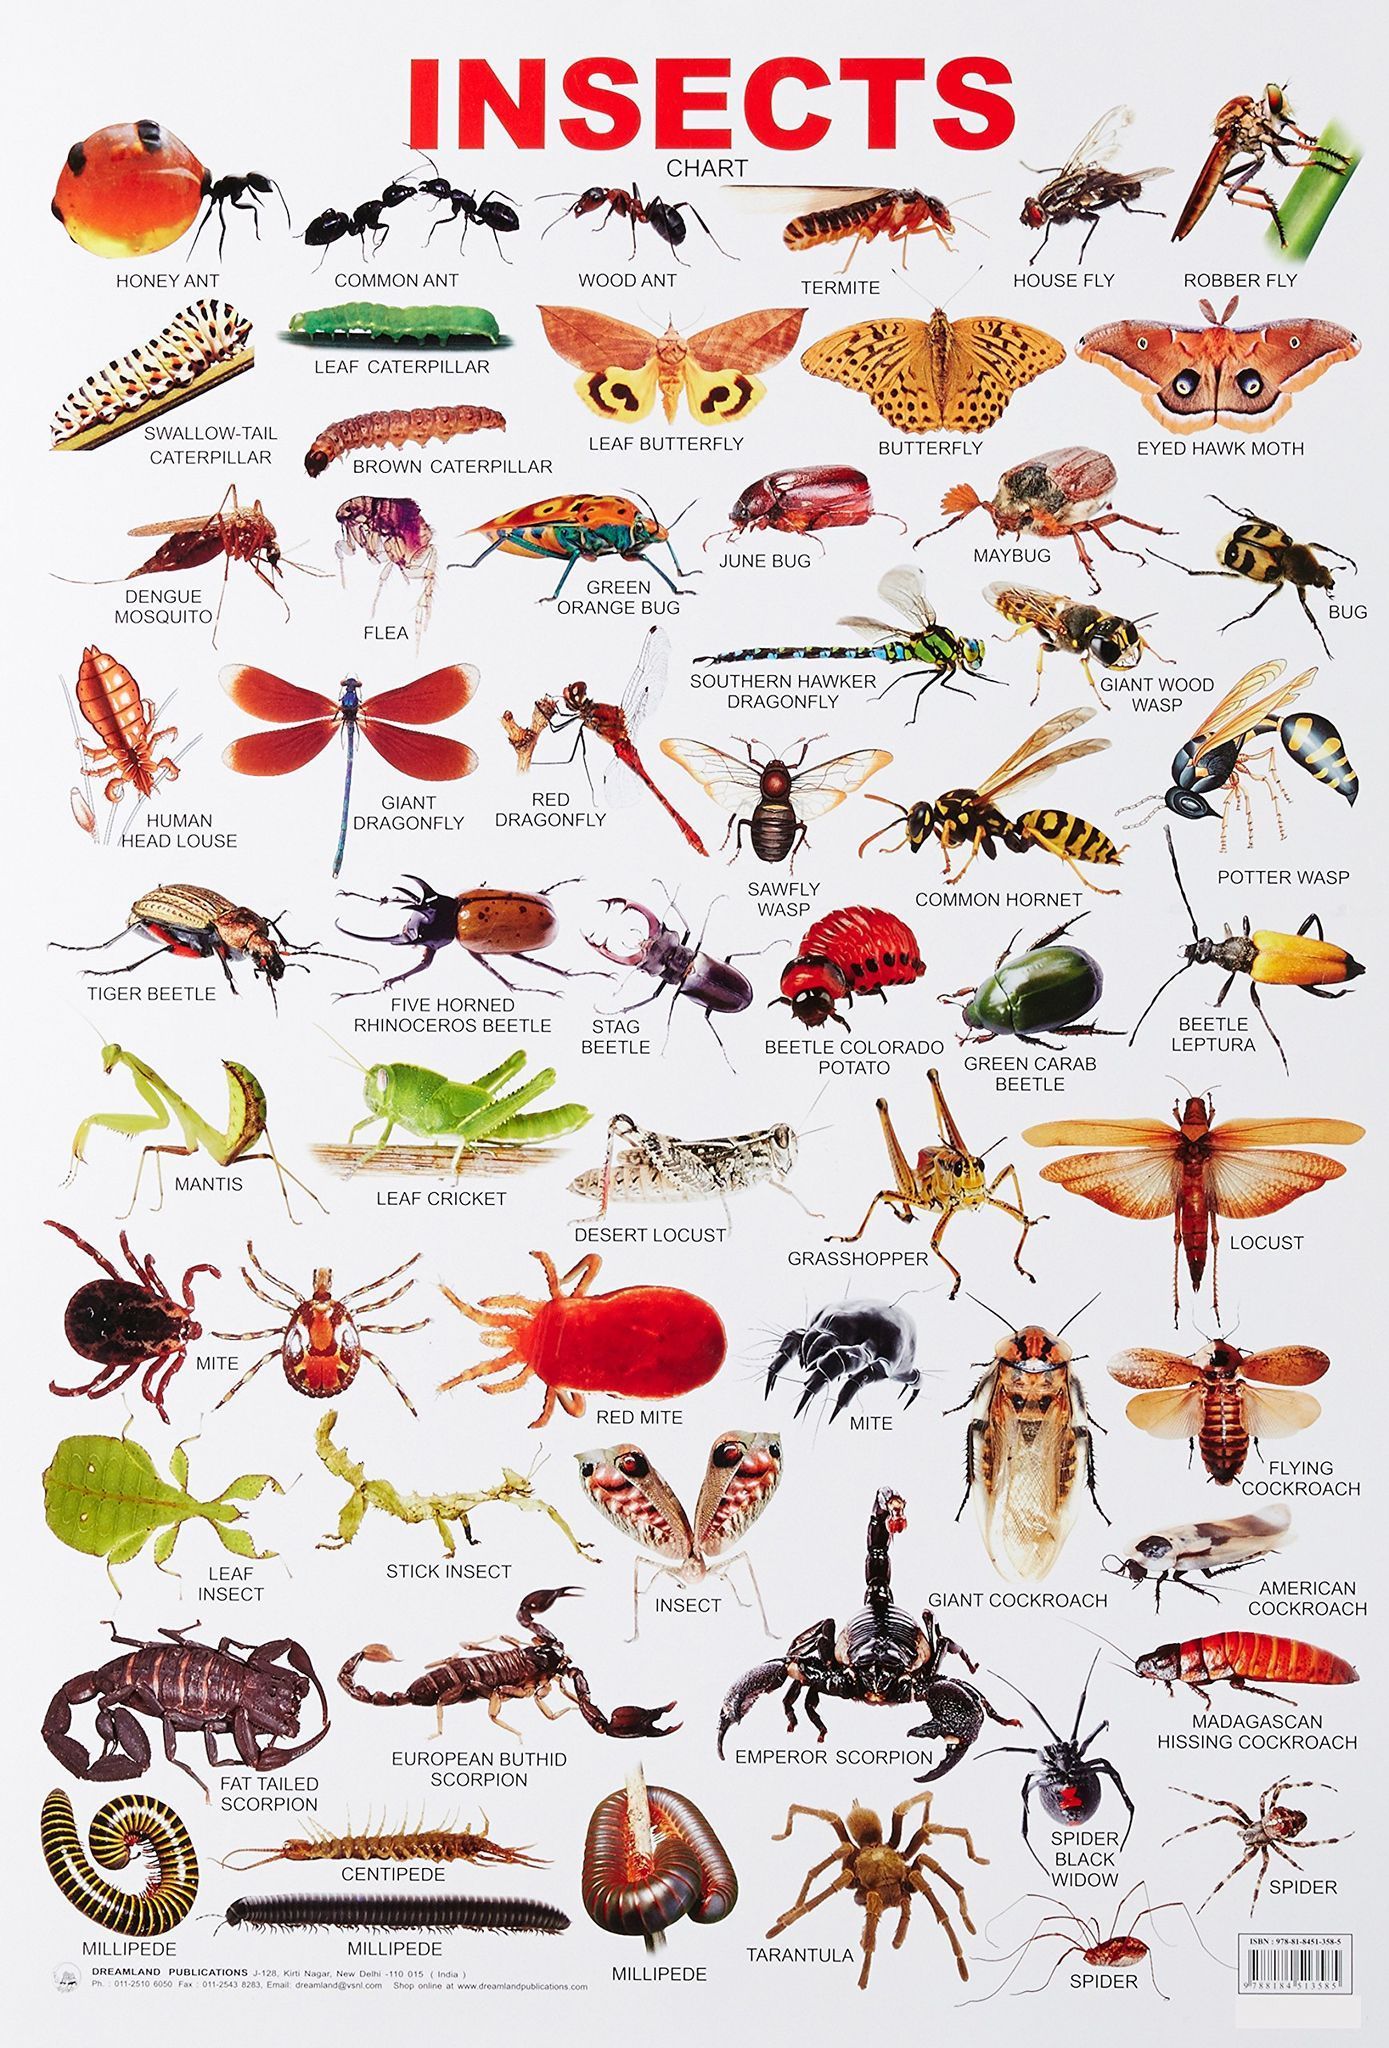 Insect Educational Wall Chart For Kids - Both Side Hard Laminated (Size 48 x 73 cm) [Poster] Dreamland Publications